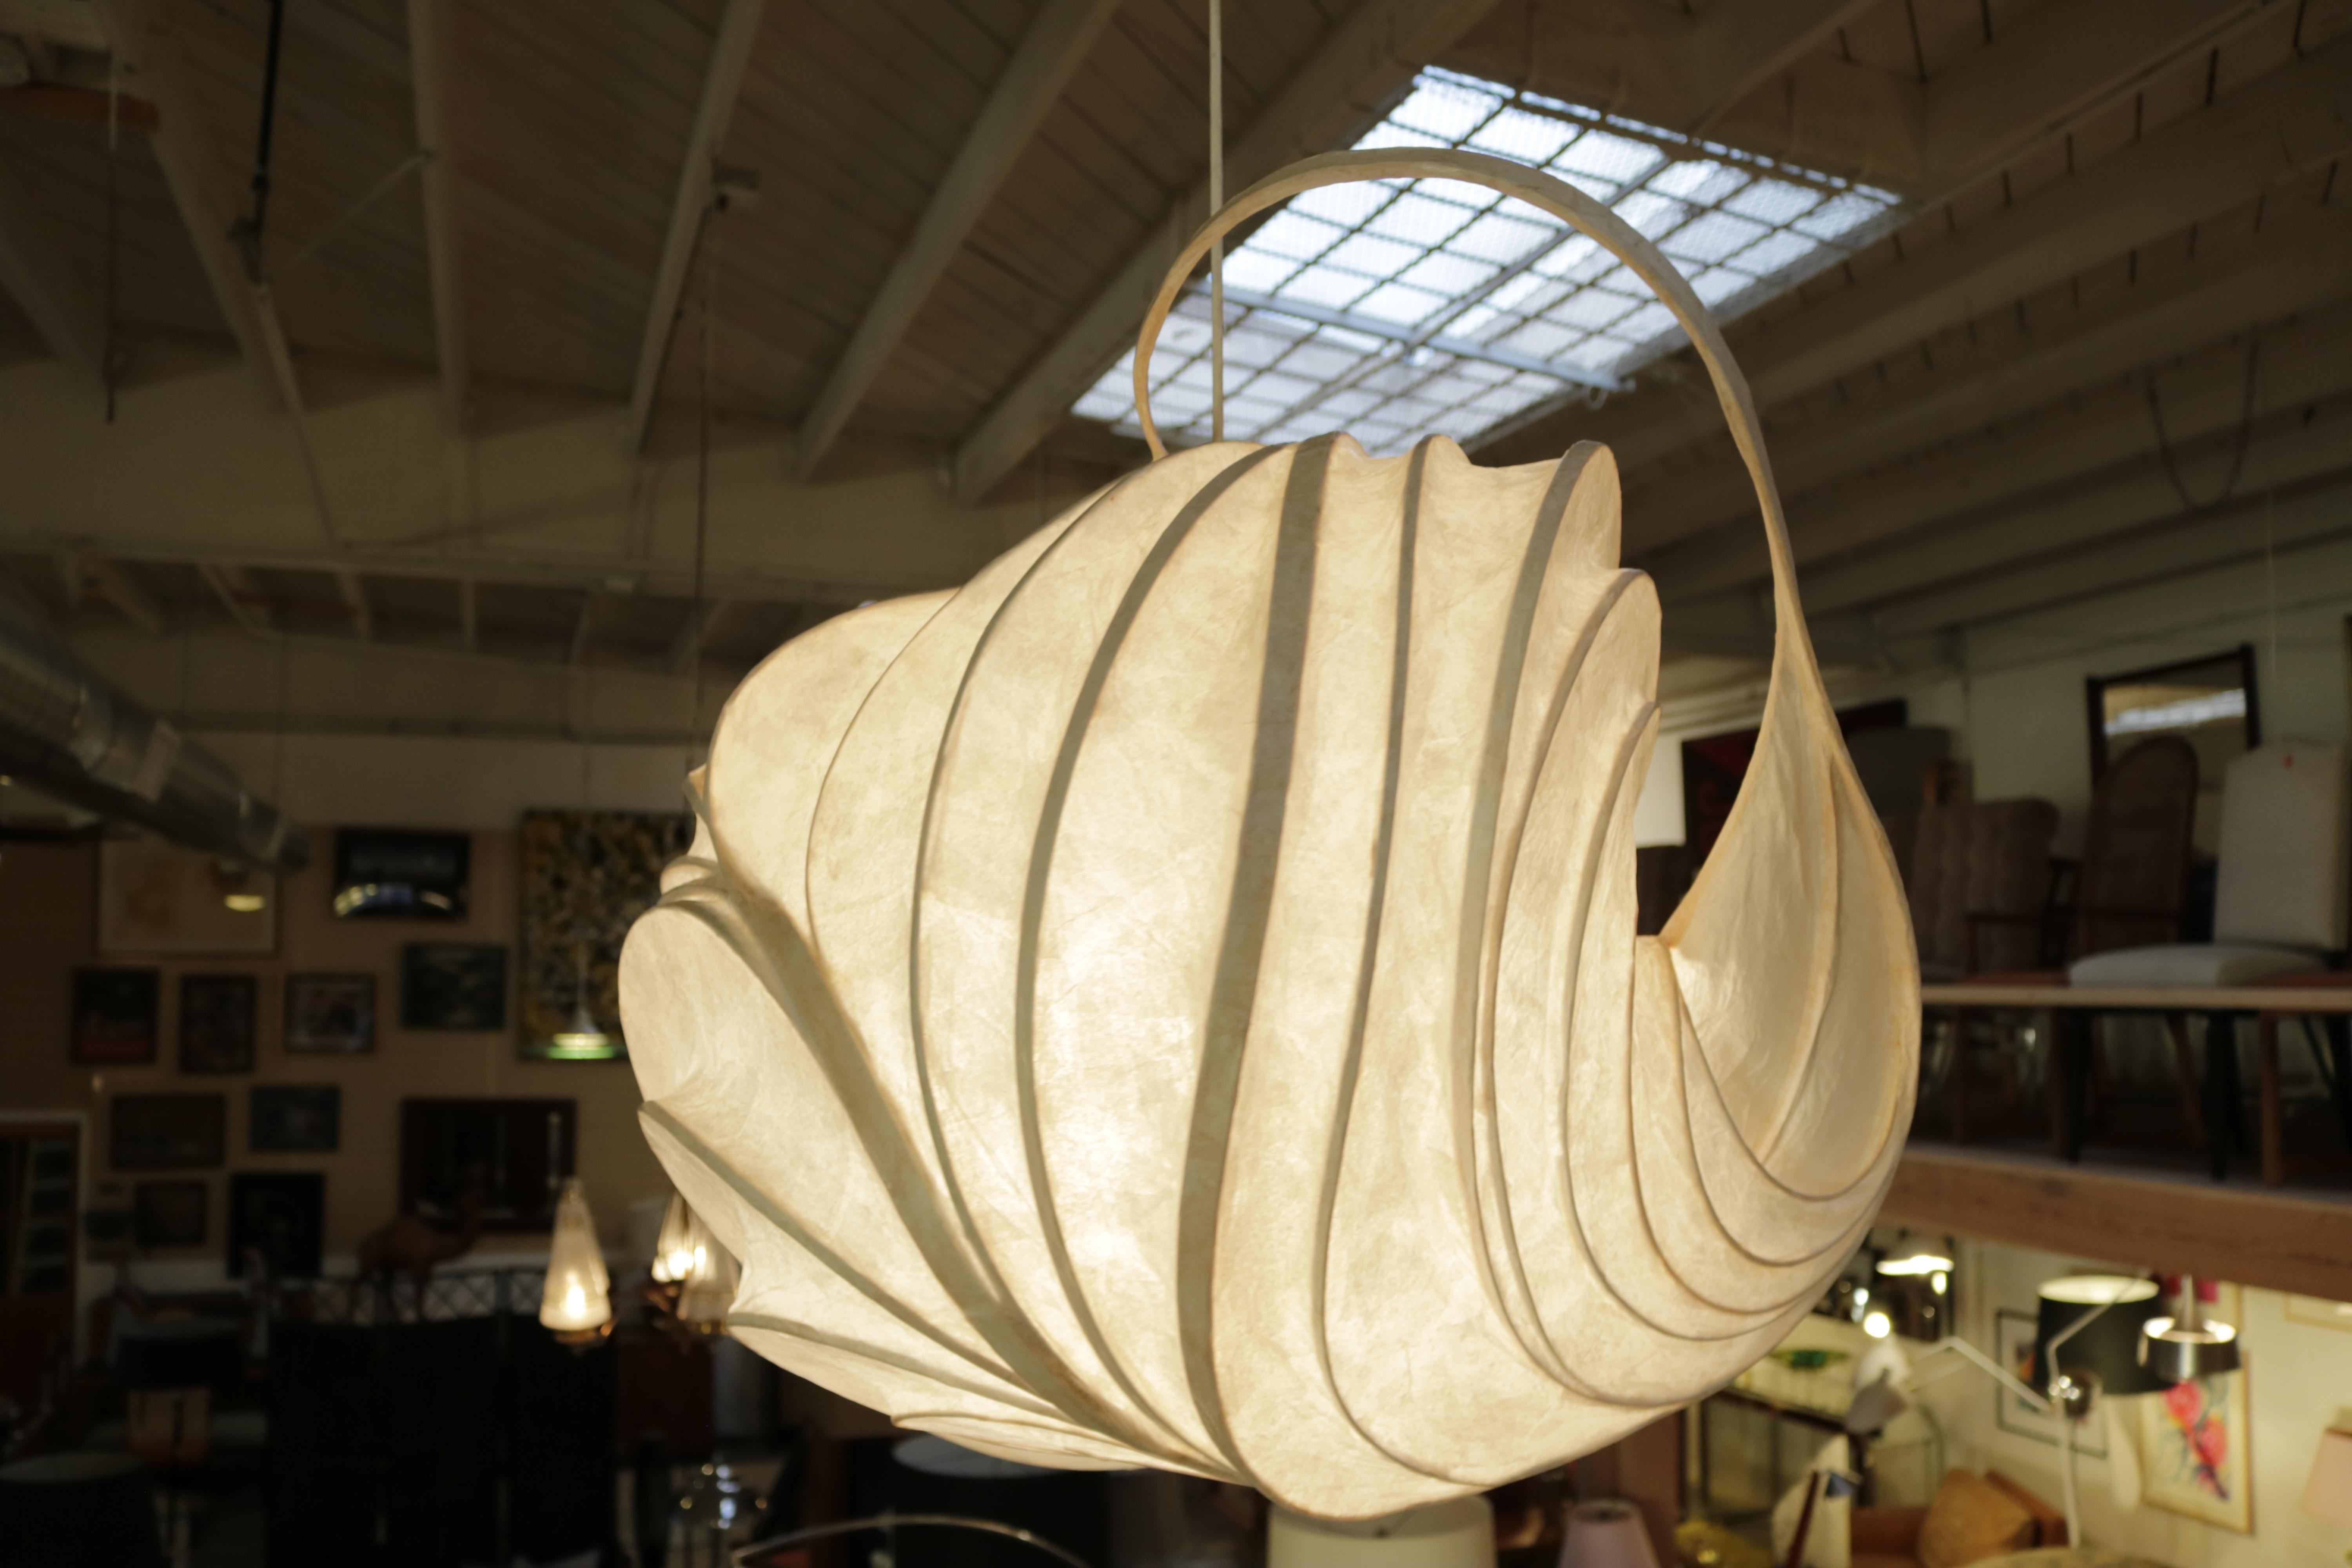 An original William Leslie 'light sculpture' in onion-like bulbous shape made from thin strips of wood bent into a frame then covered with paper soaked in polyvinyl resin and internally by incandescent light bulbs.
Following the light around it